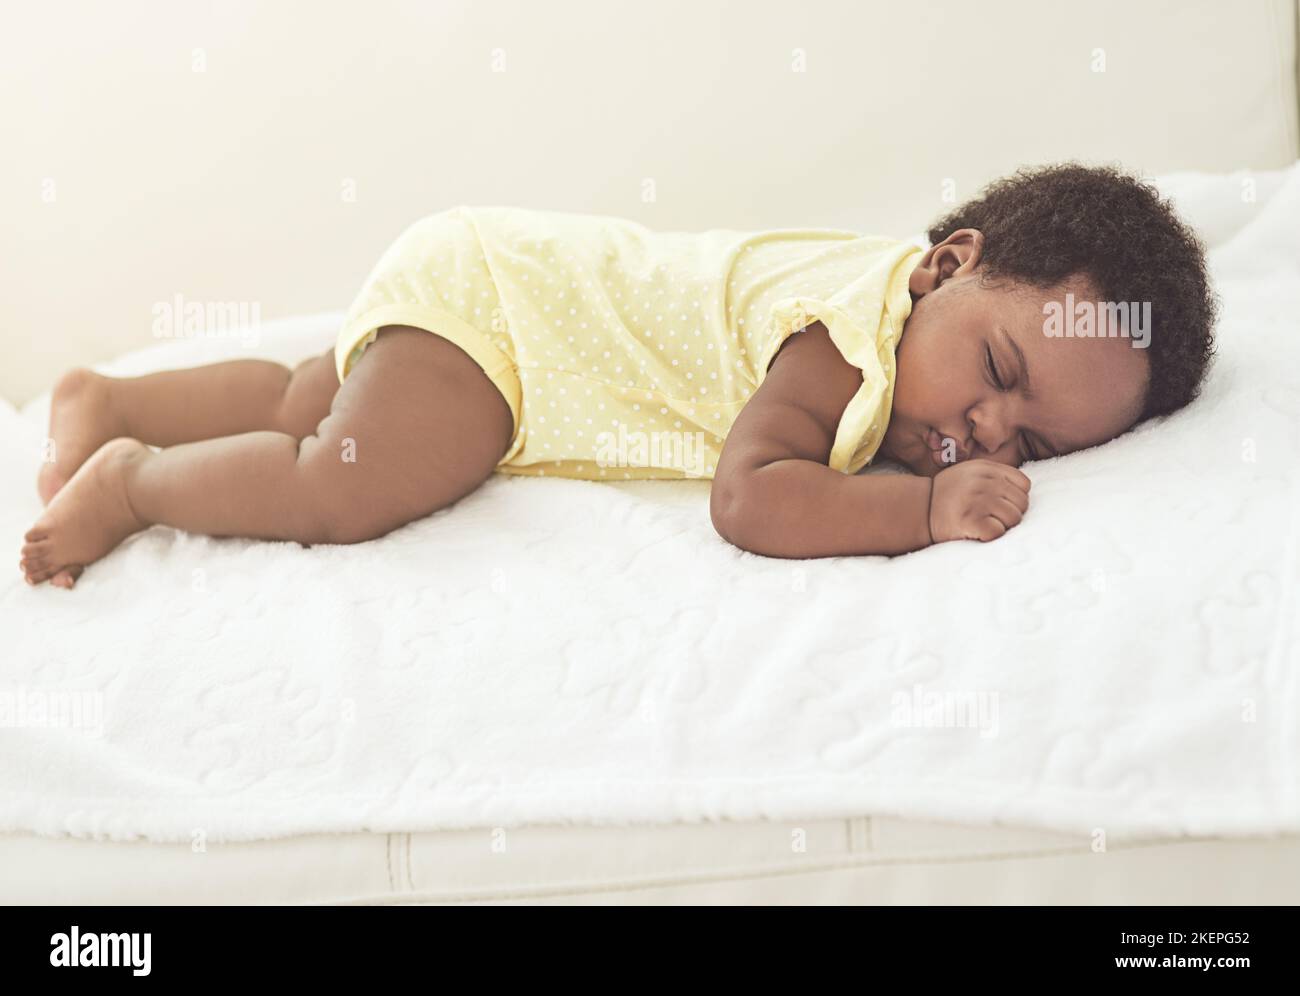 Babies need lots of rest. a baby girl asleep on a bed at home. Stock Photo